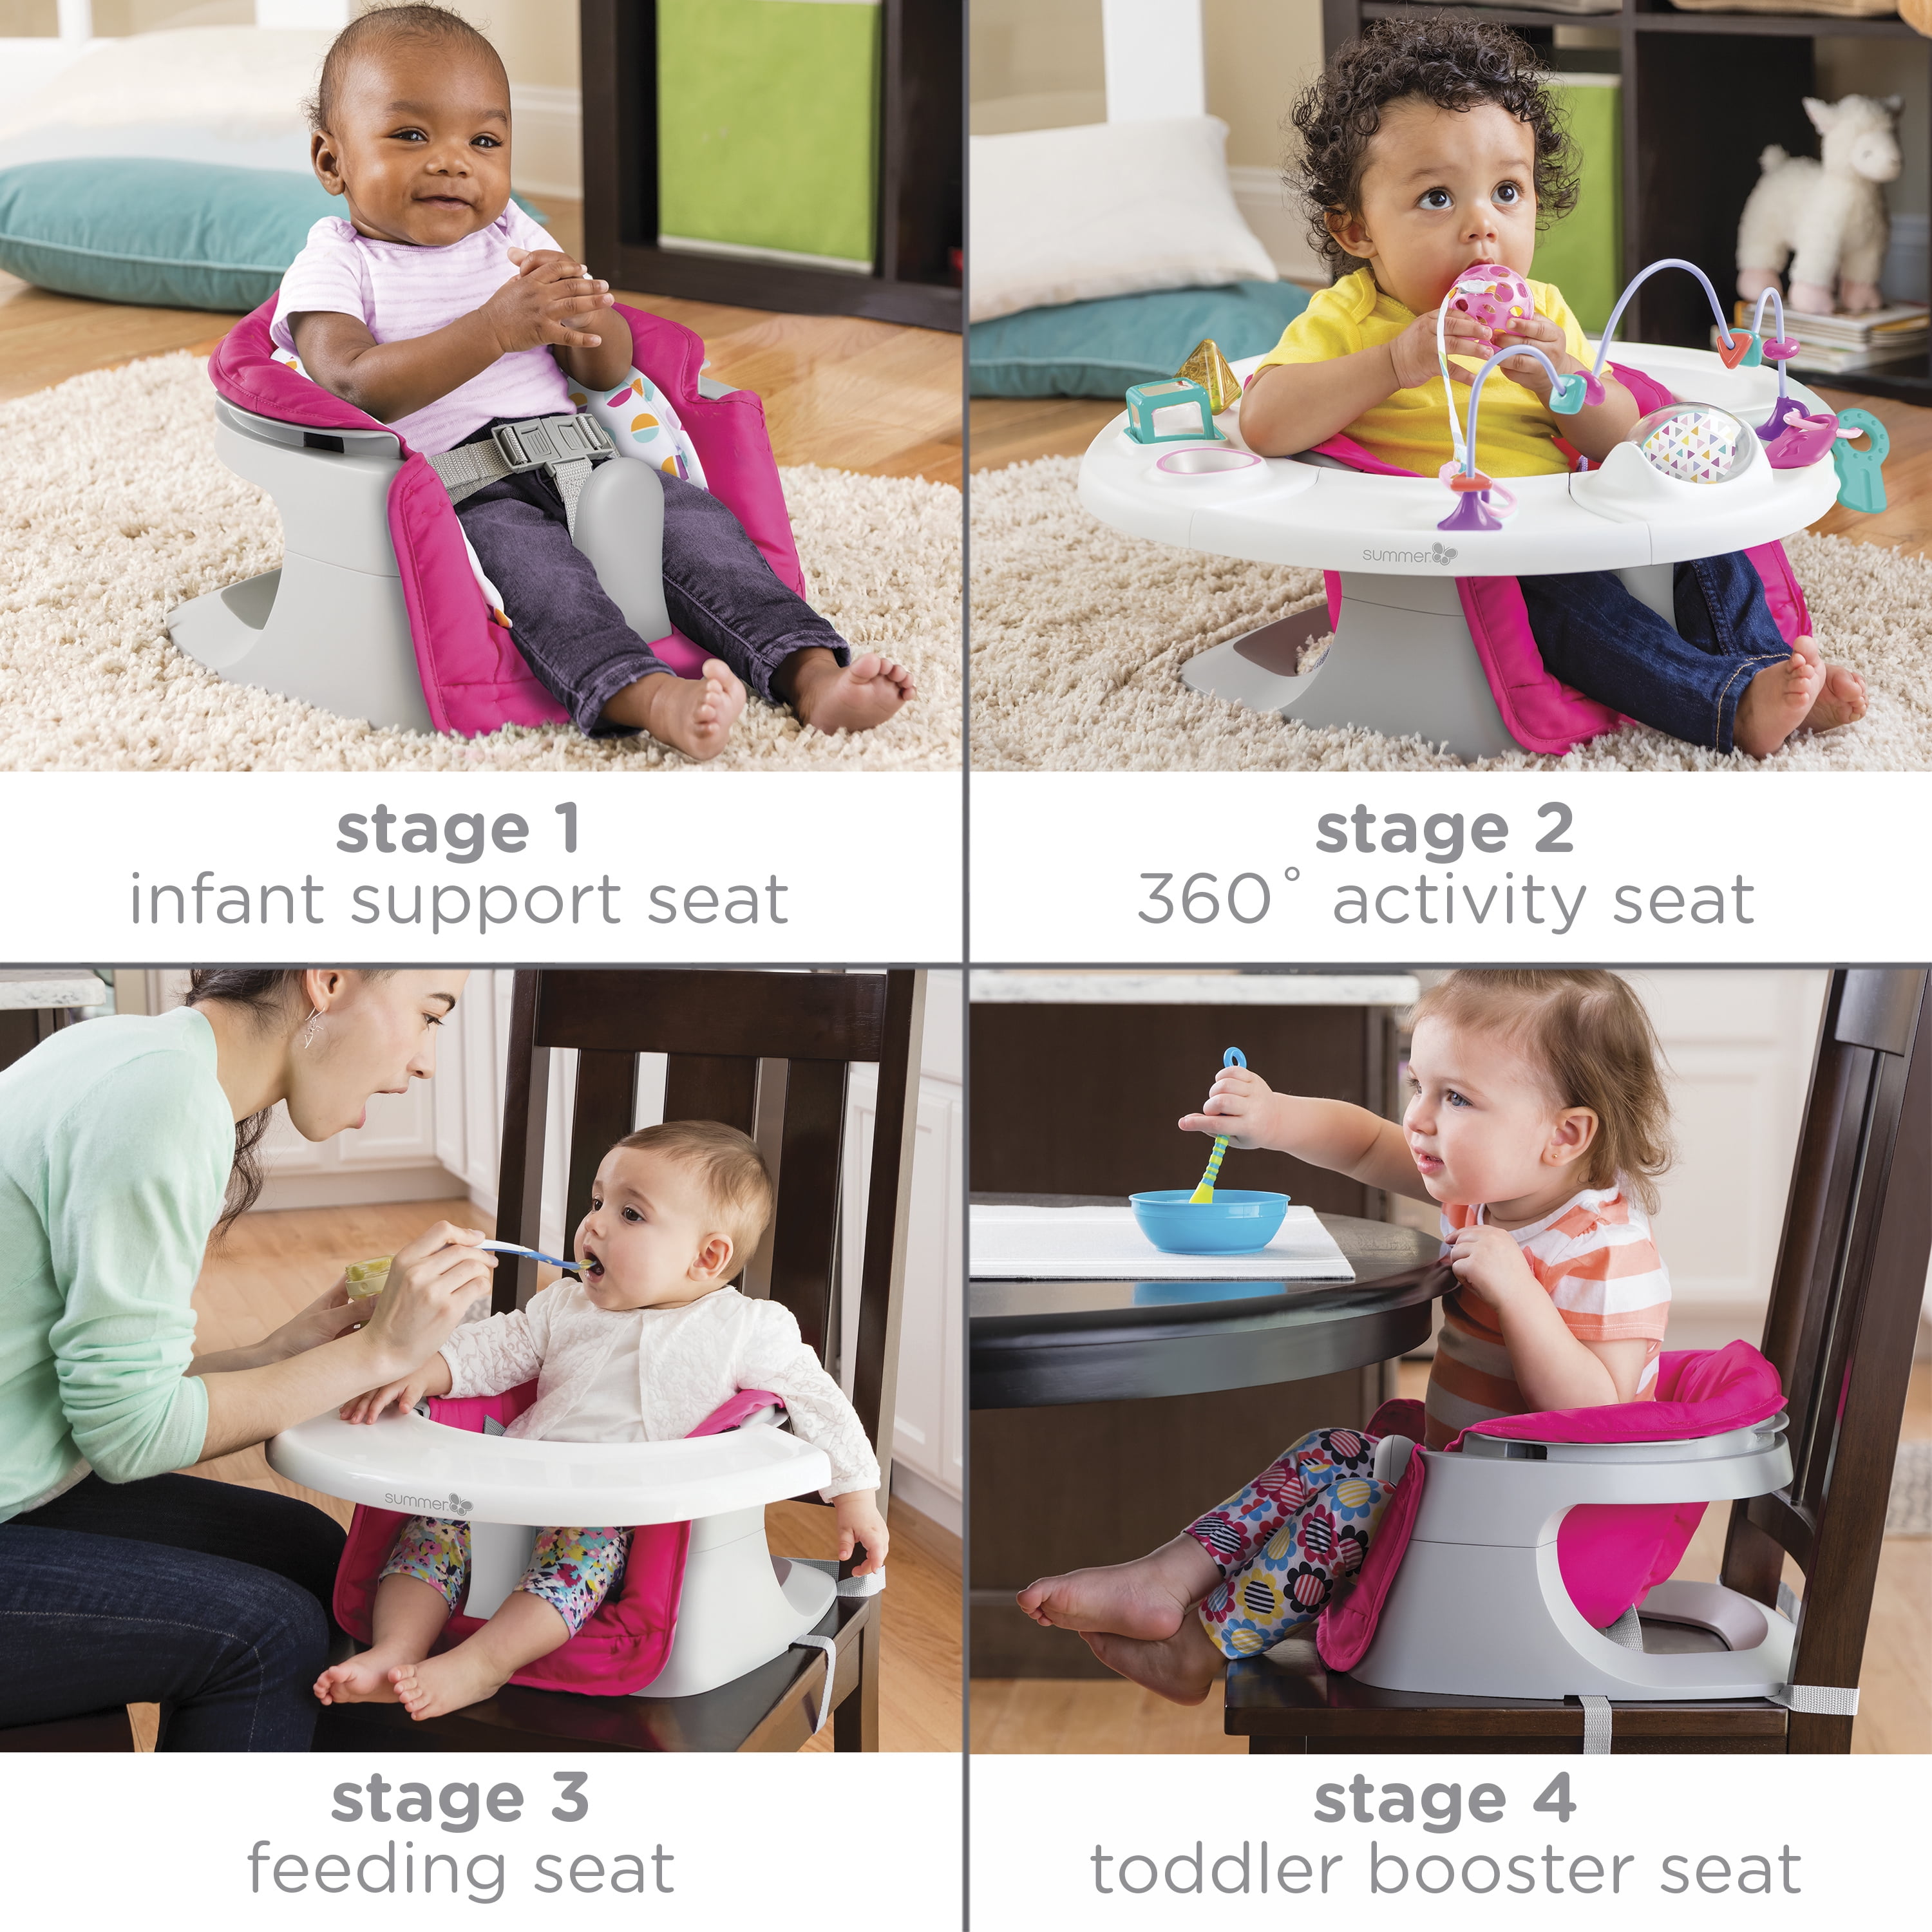 summer infant 4 in 1 super seat reviews